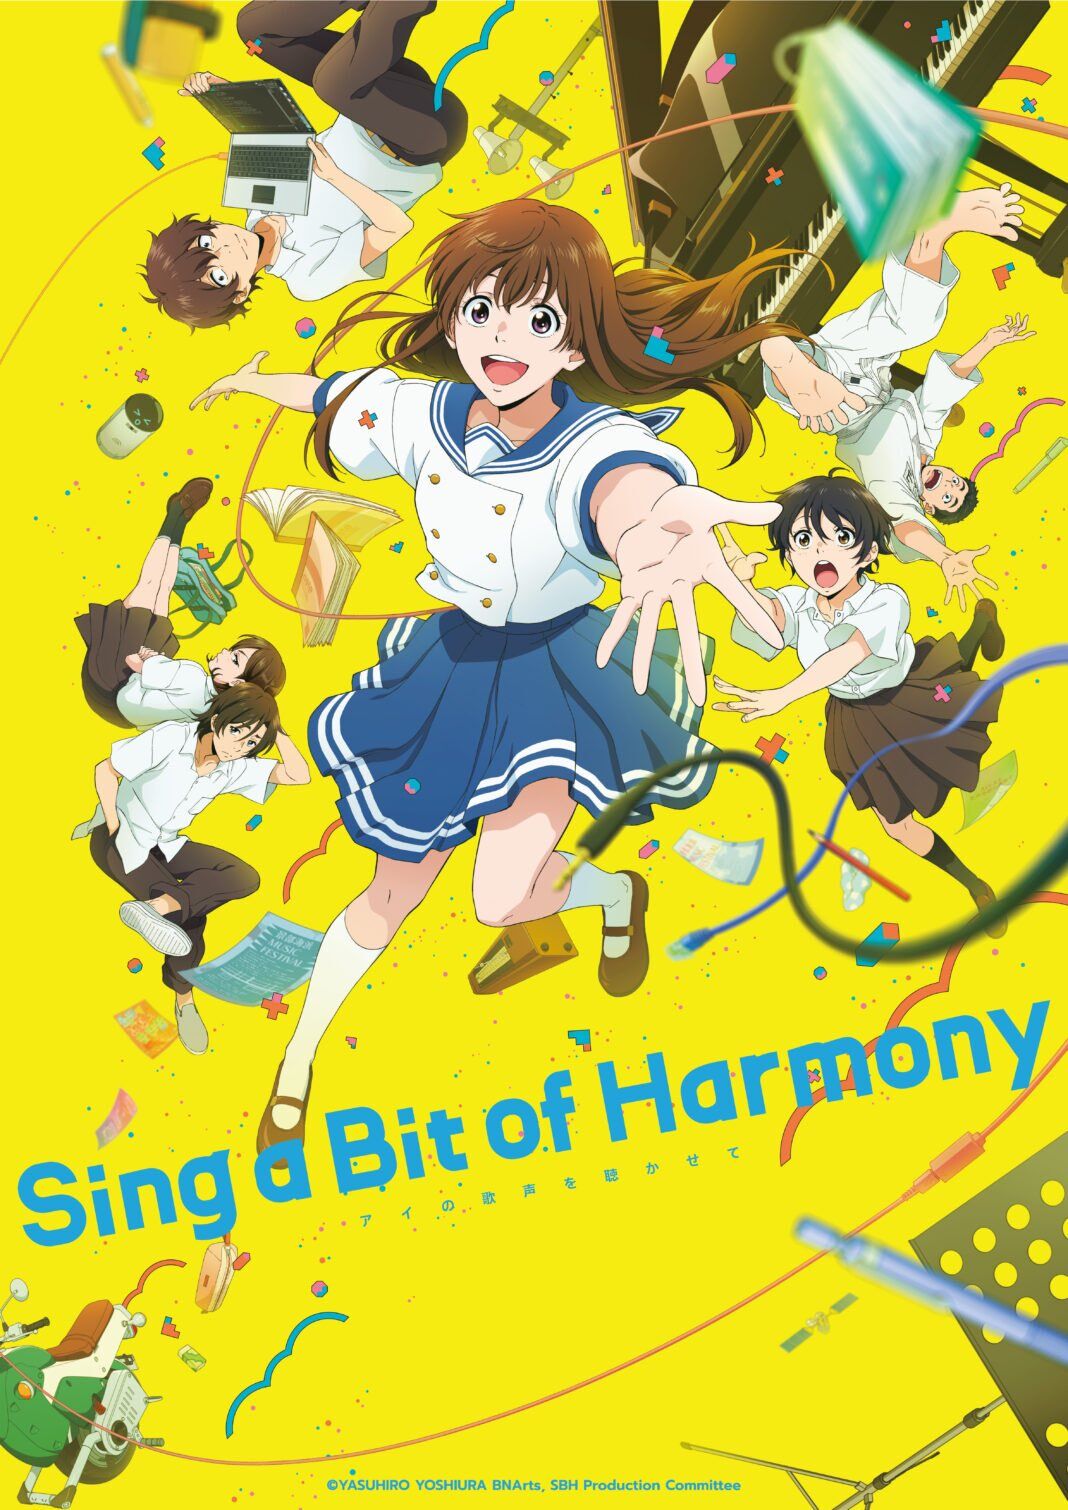 Funimation shares Sing a Bit of Harmony anime release date